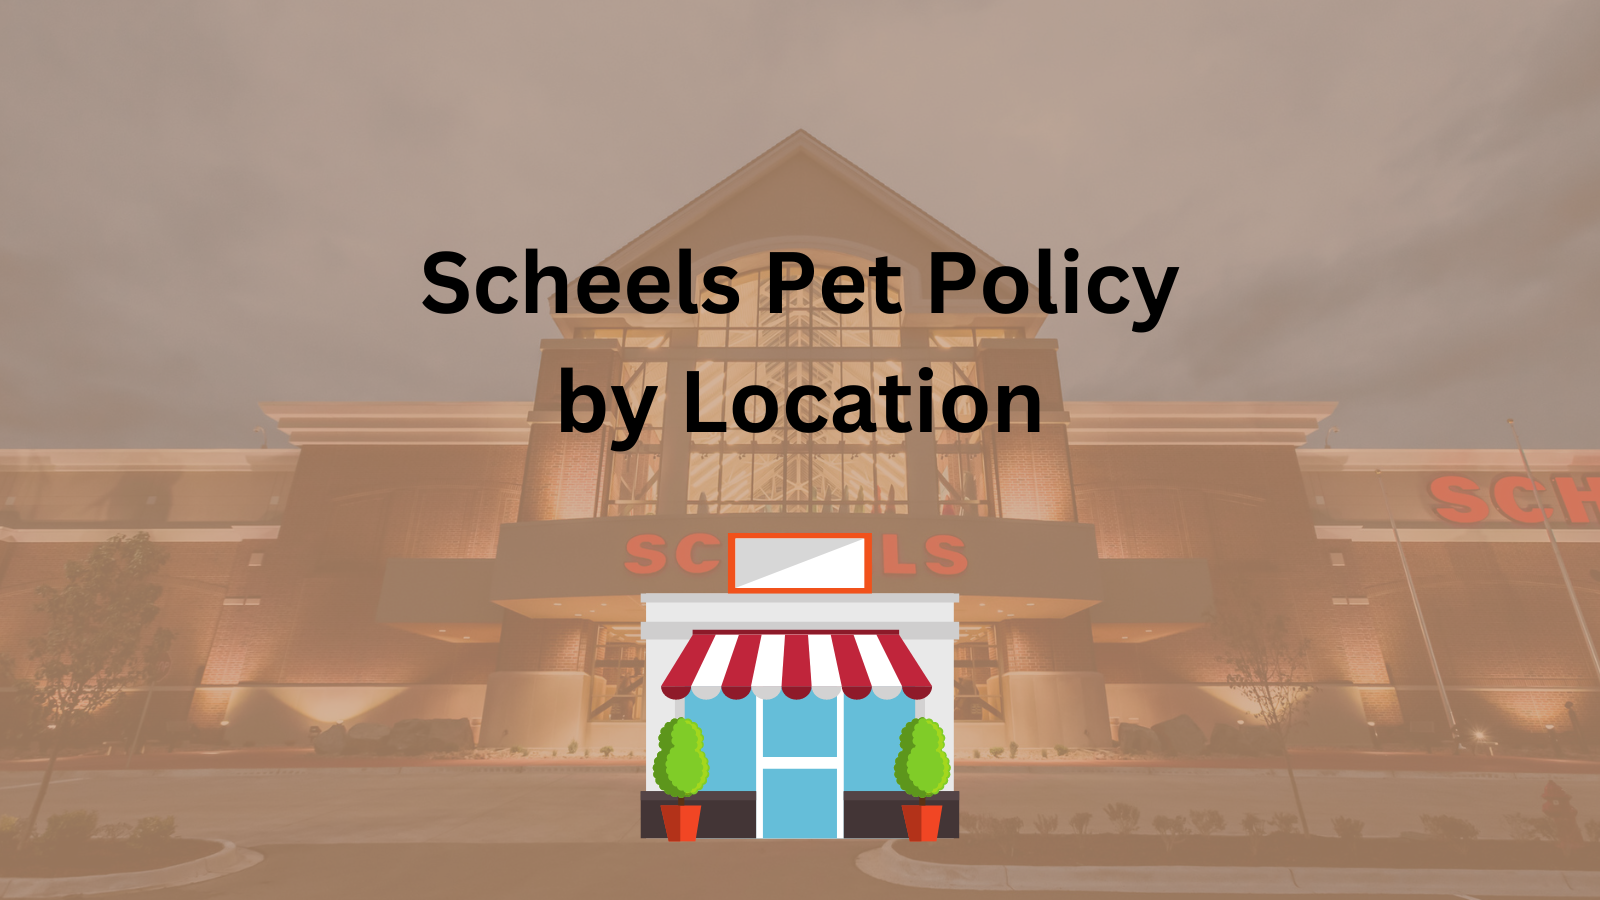 Image Text: Scheels Pet Policy by Location